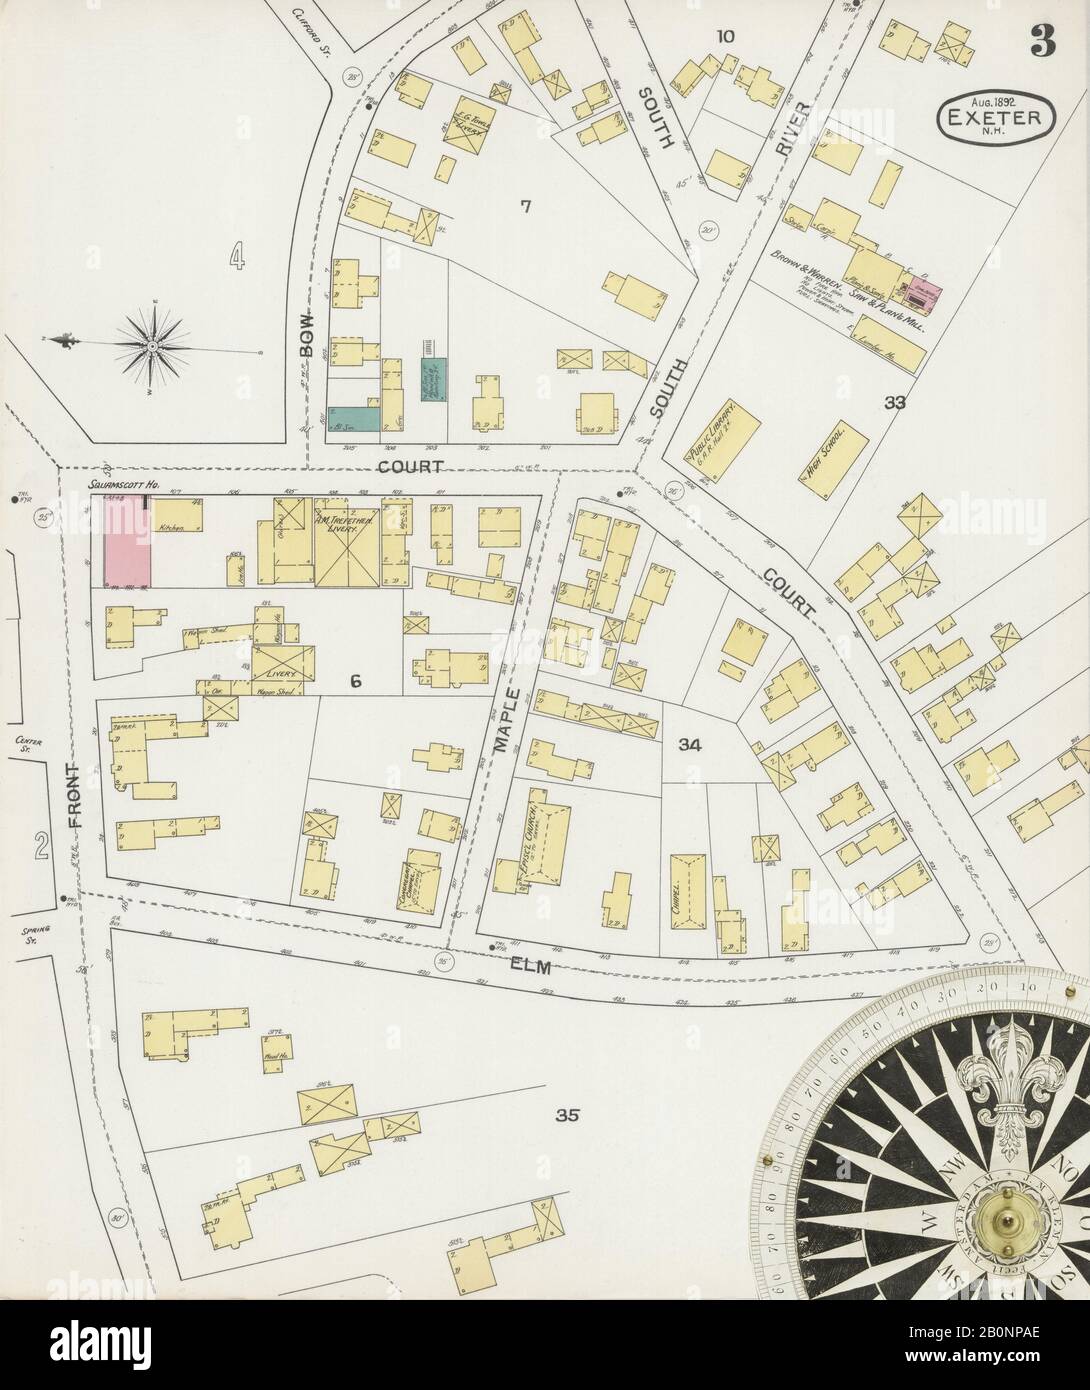 Image 3 of Sanborn Fire Insurance Map from Exeter, Rockingham County, New Hampshire. Sep 1892. 5 Sheet(s), America, street map with a Nineteenth Century compass Stock Photo